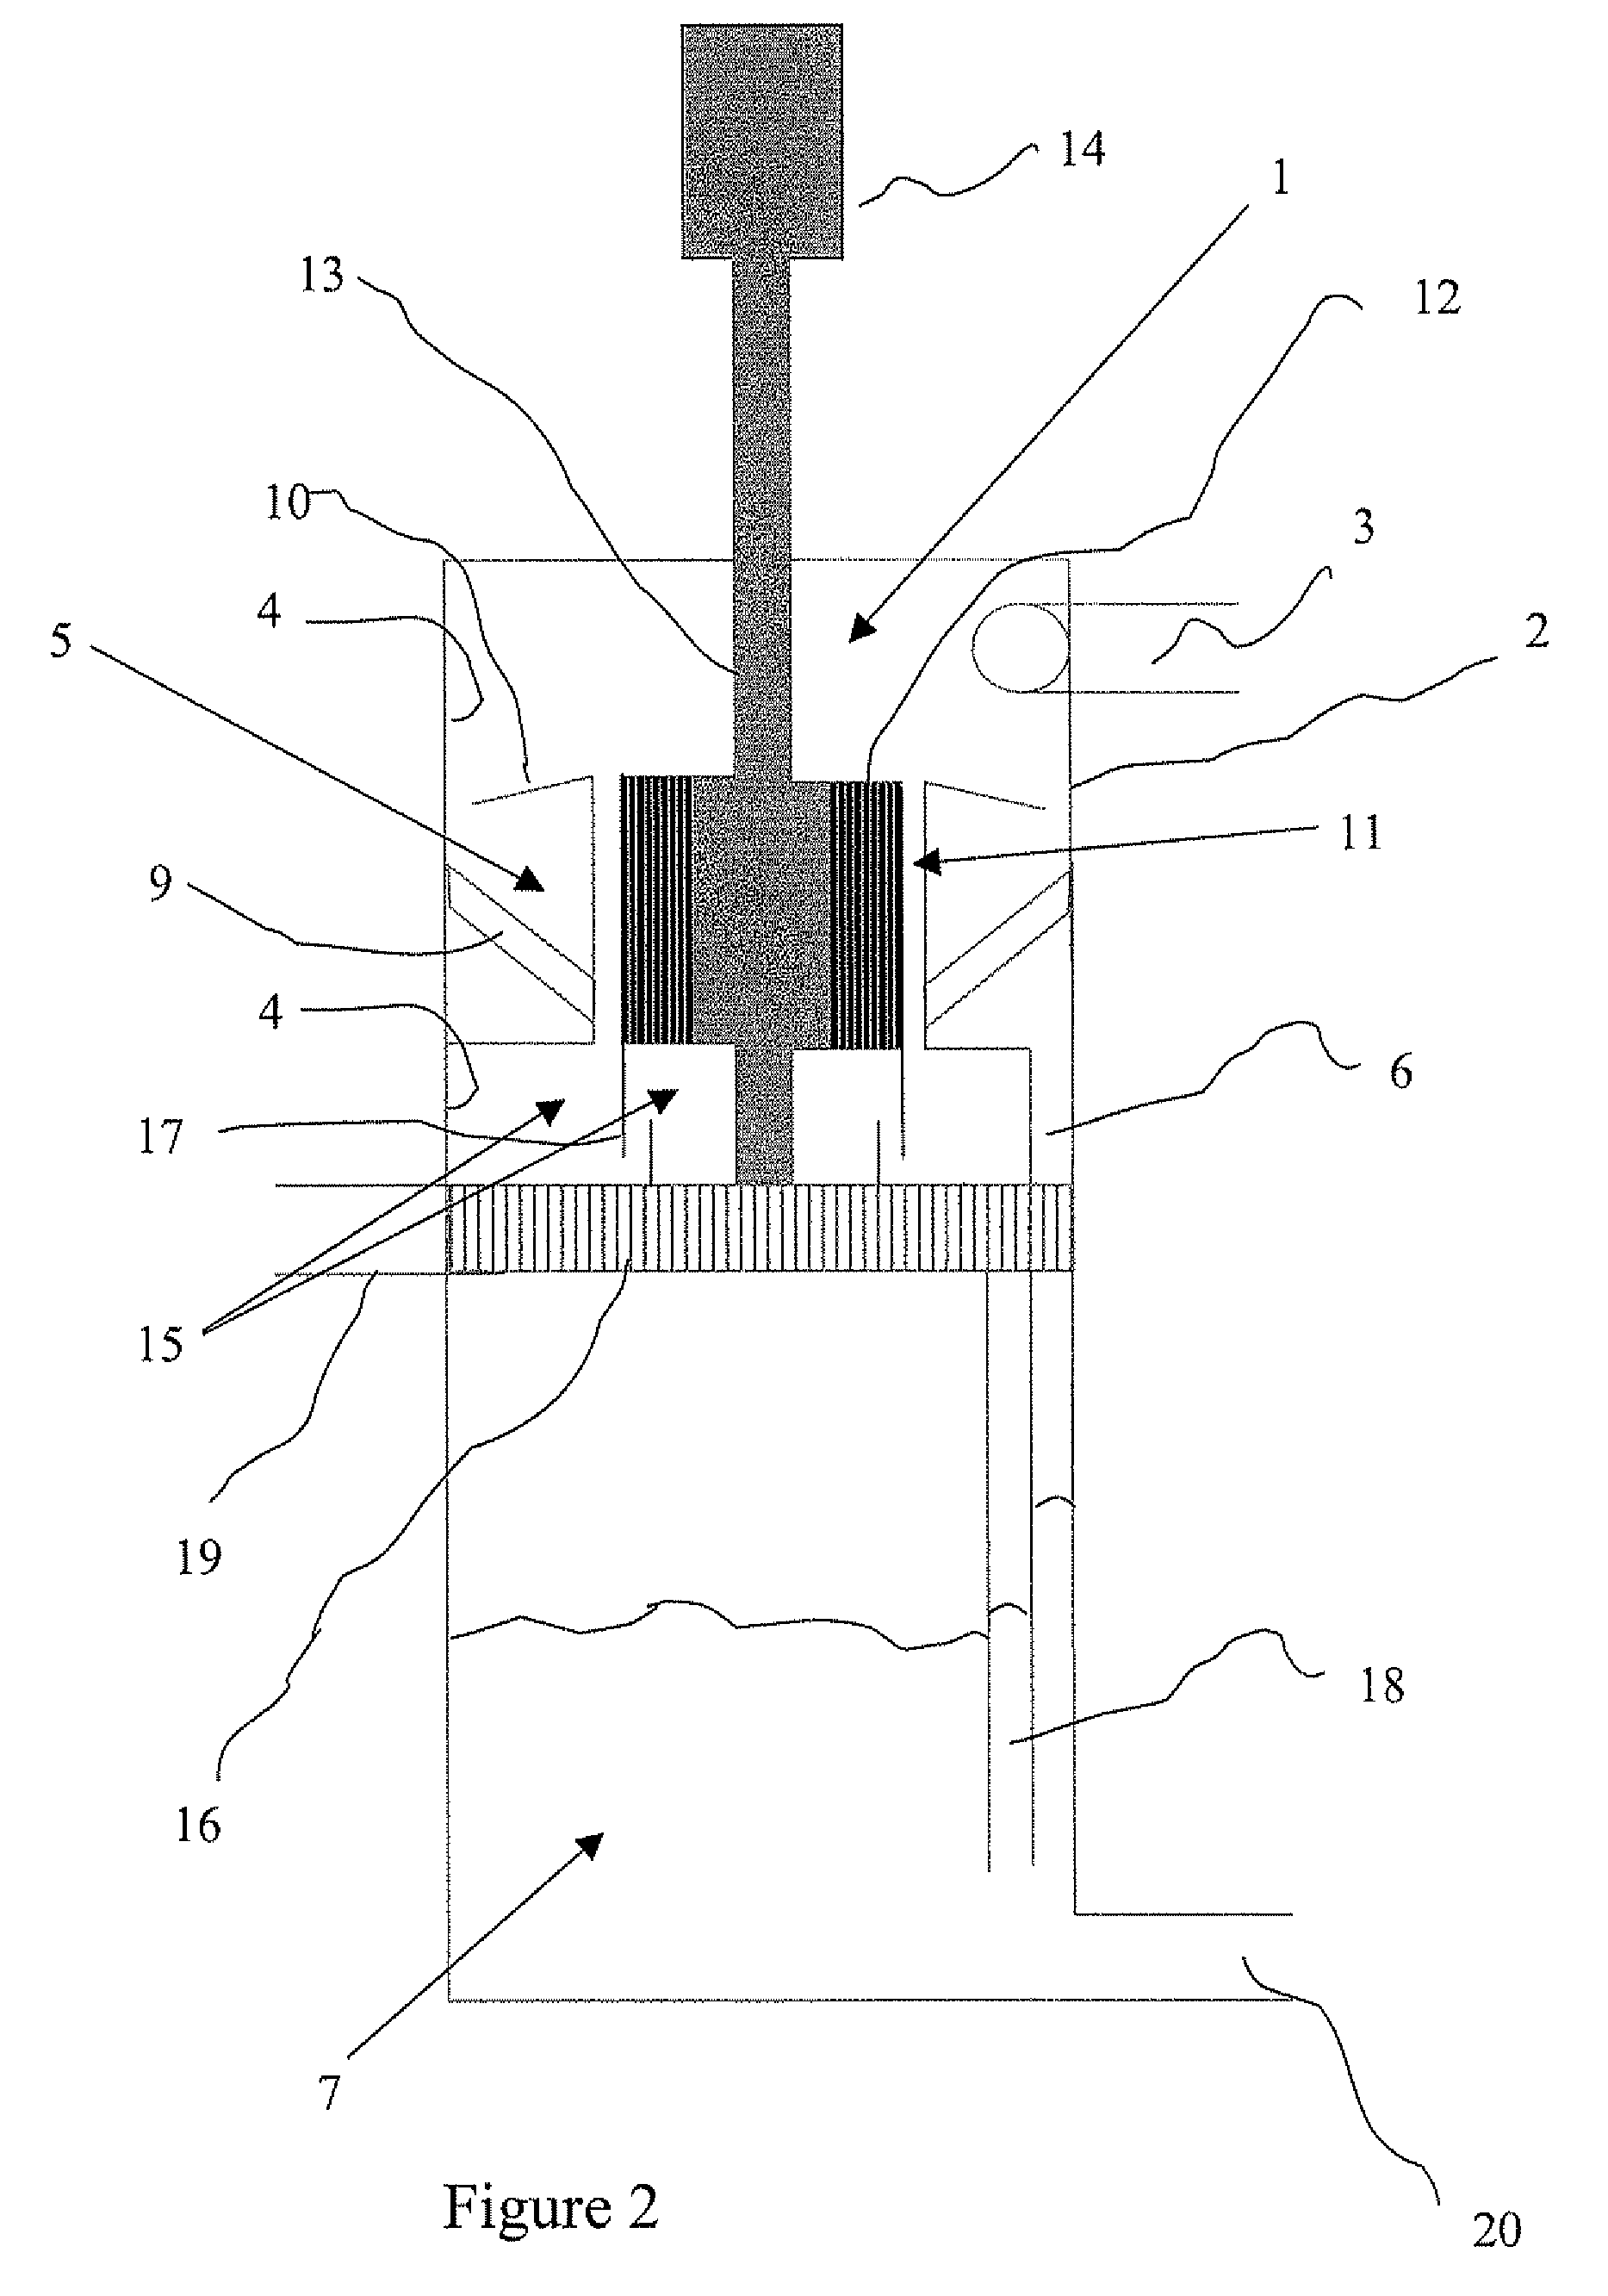 Separation device for removing liquid from a mixture comprising a gas and liquid